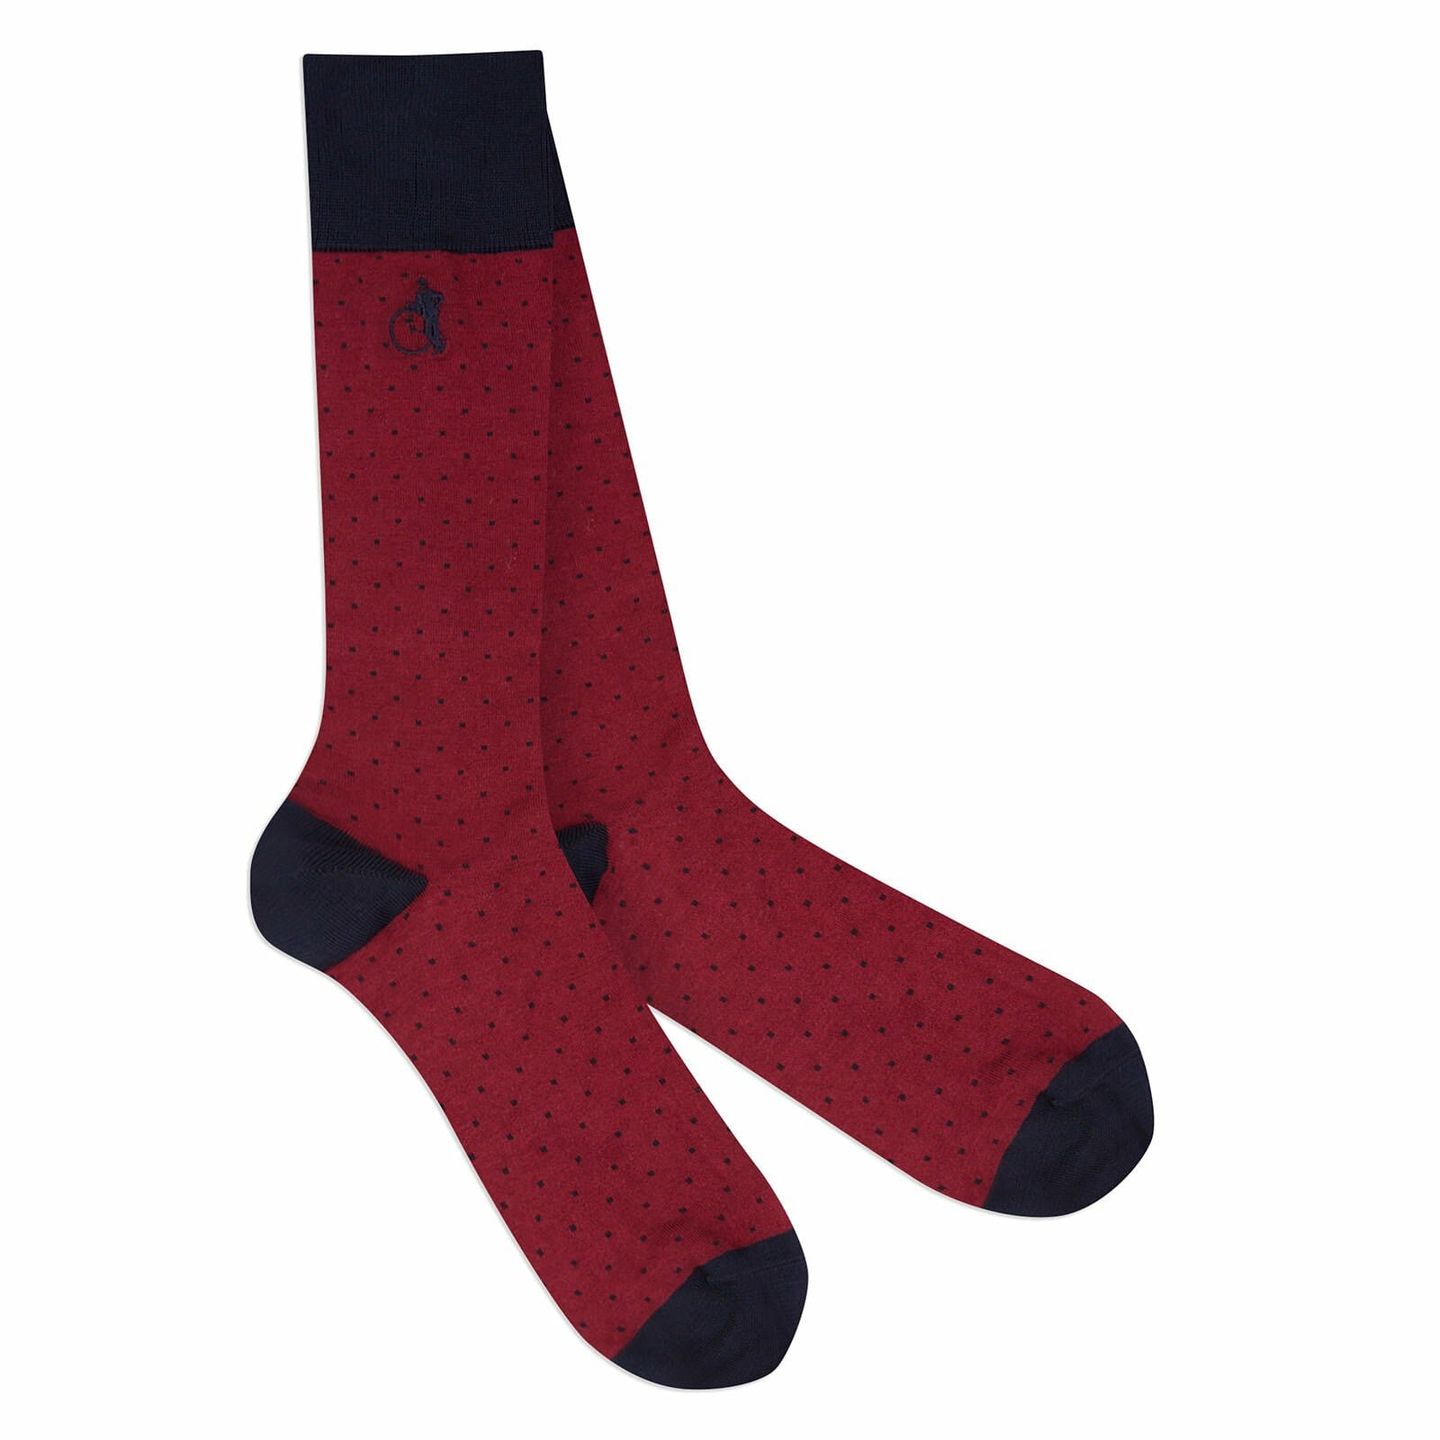 A pair of red socks with black dots with a white background